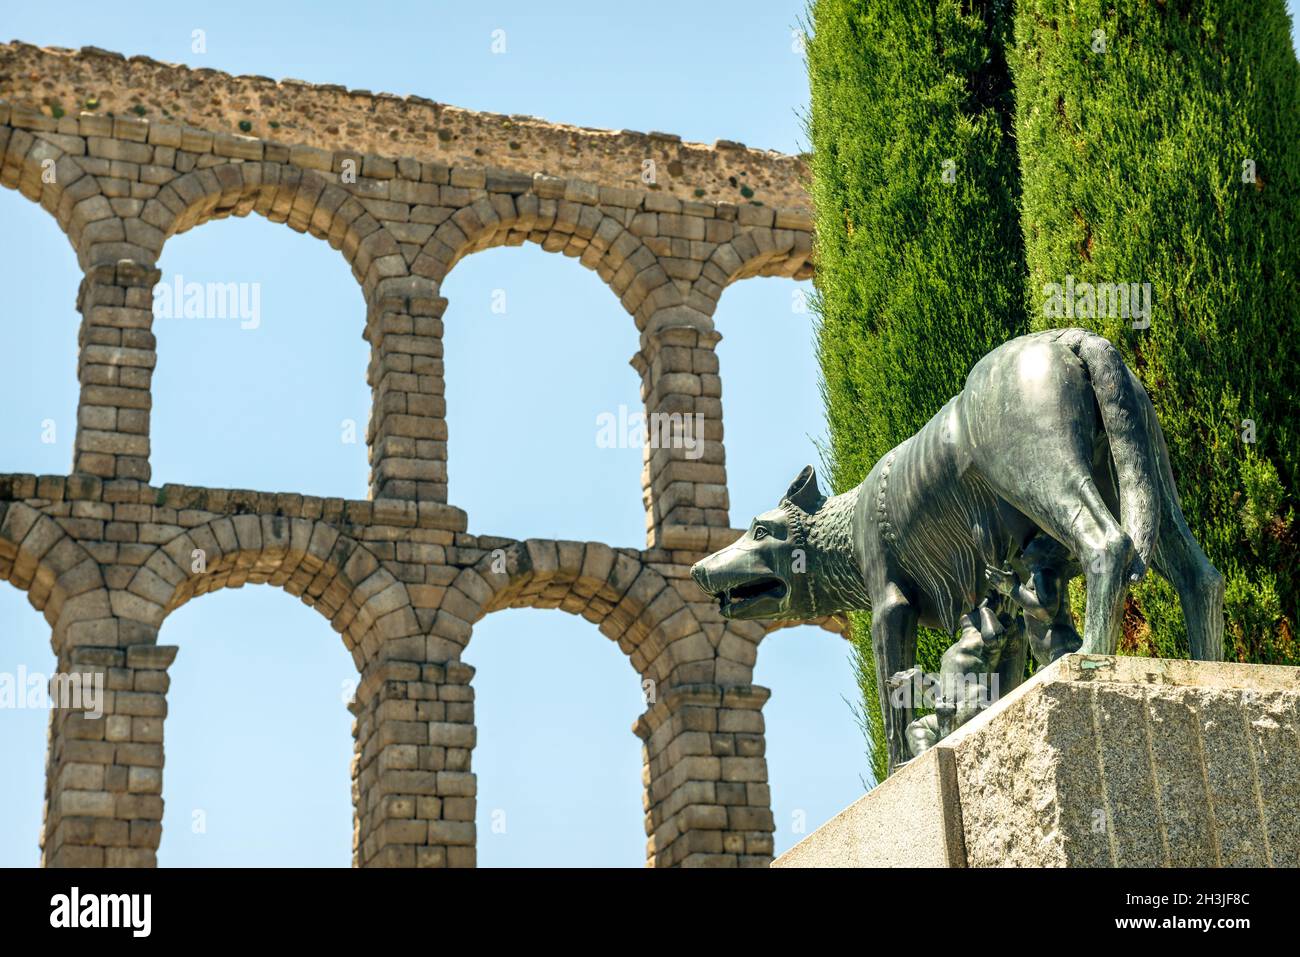 She wolf with Romolo and Remo and the roman aqueduct in Segovia, Spain Stock Photo